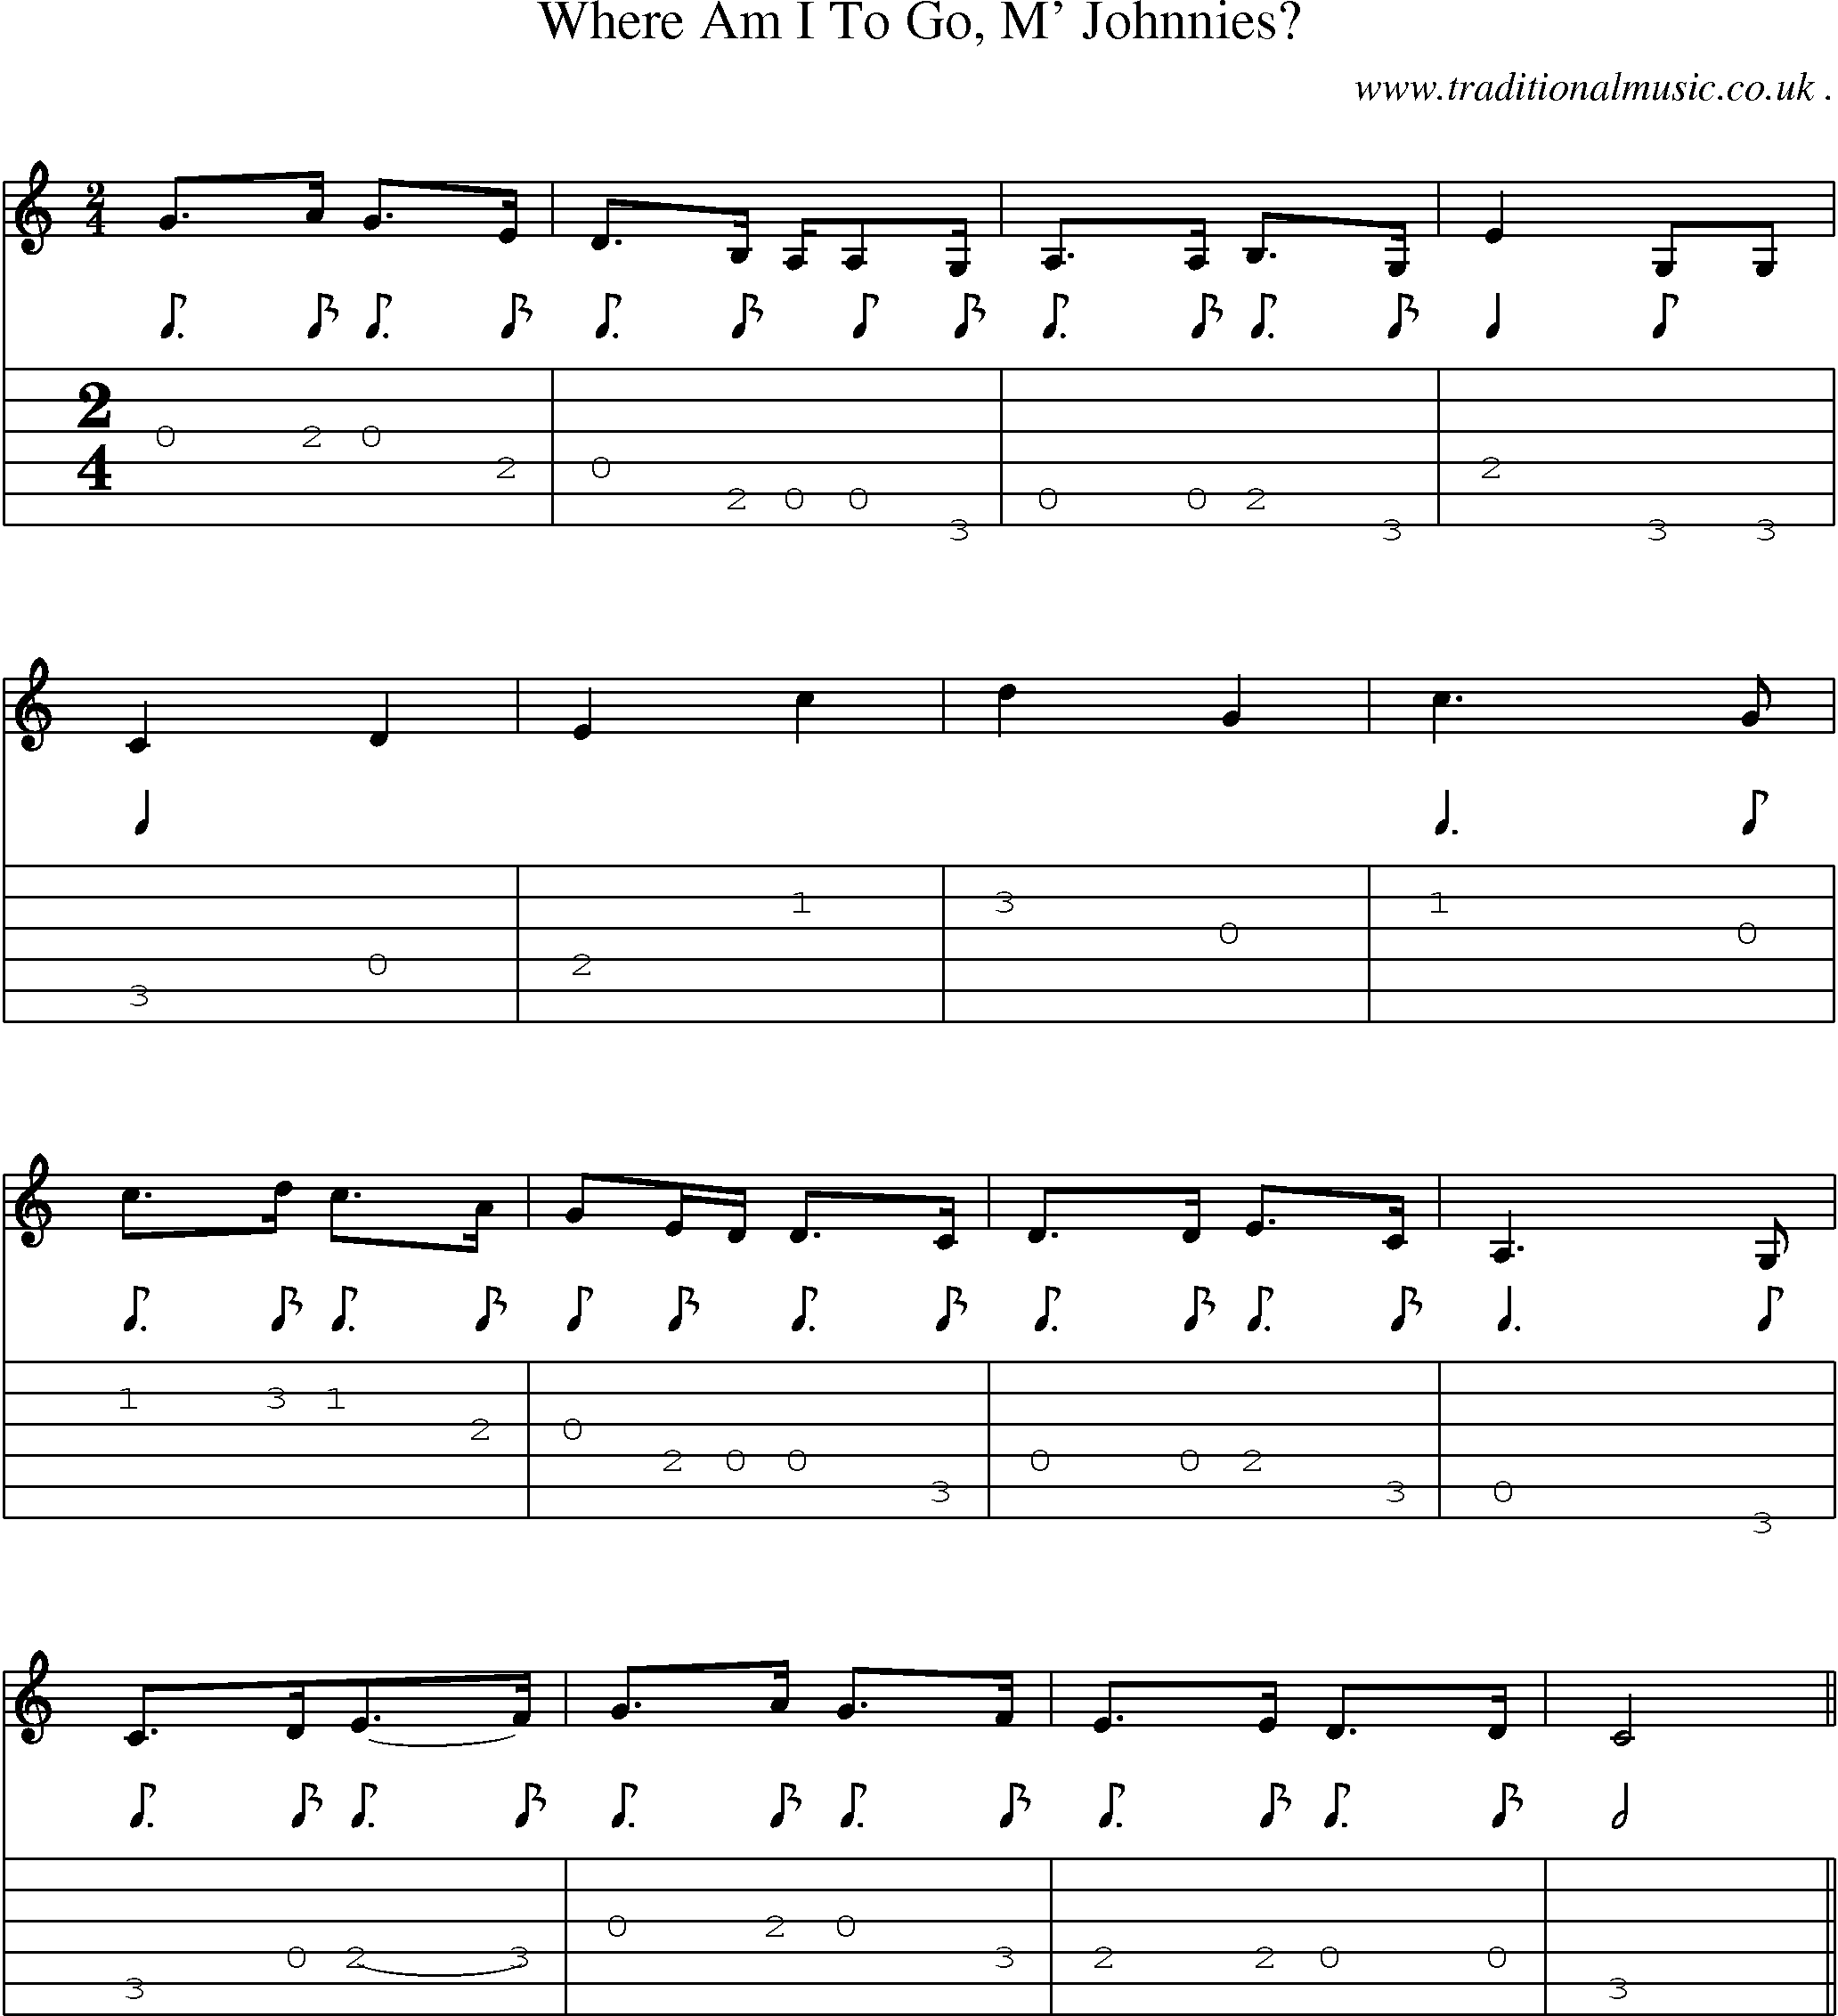 Sheet-Music and Guitar Tabs for Where Am I To Go M Johnnies